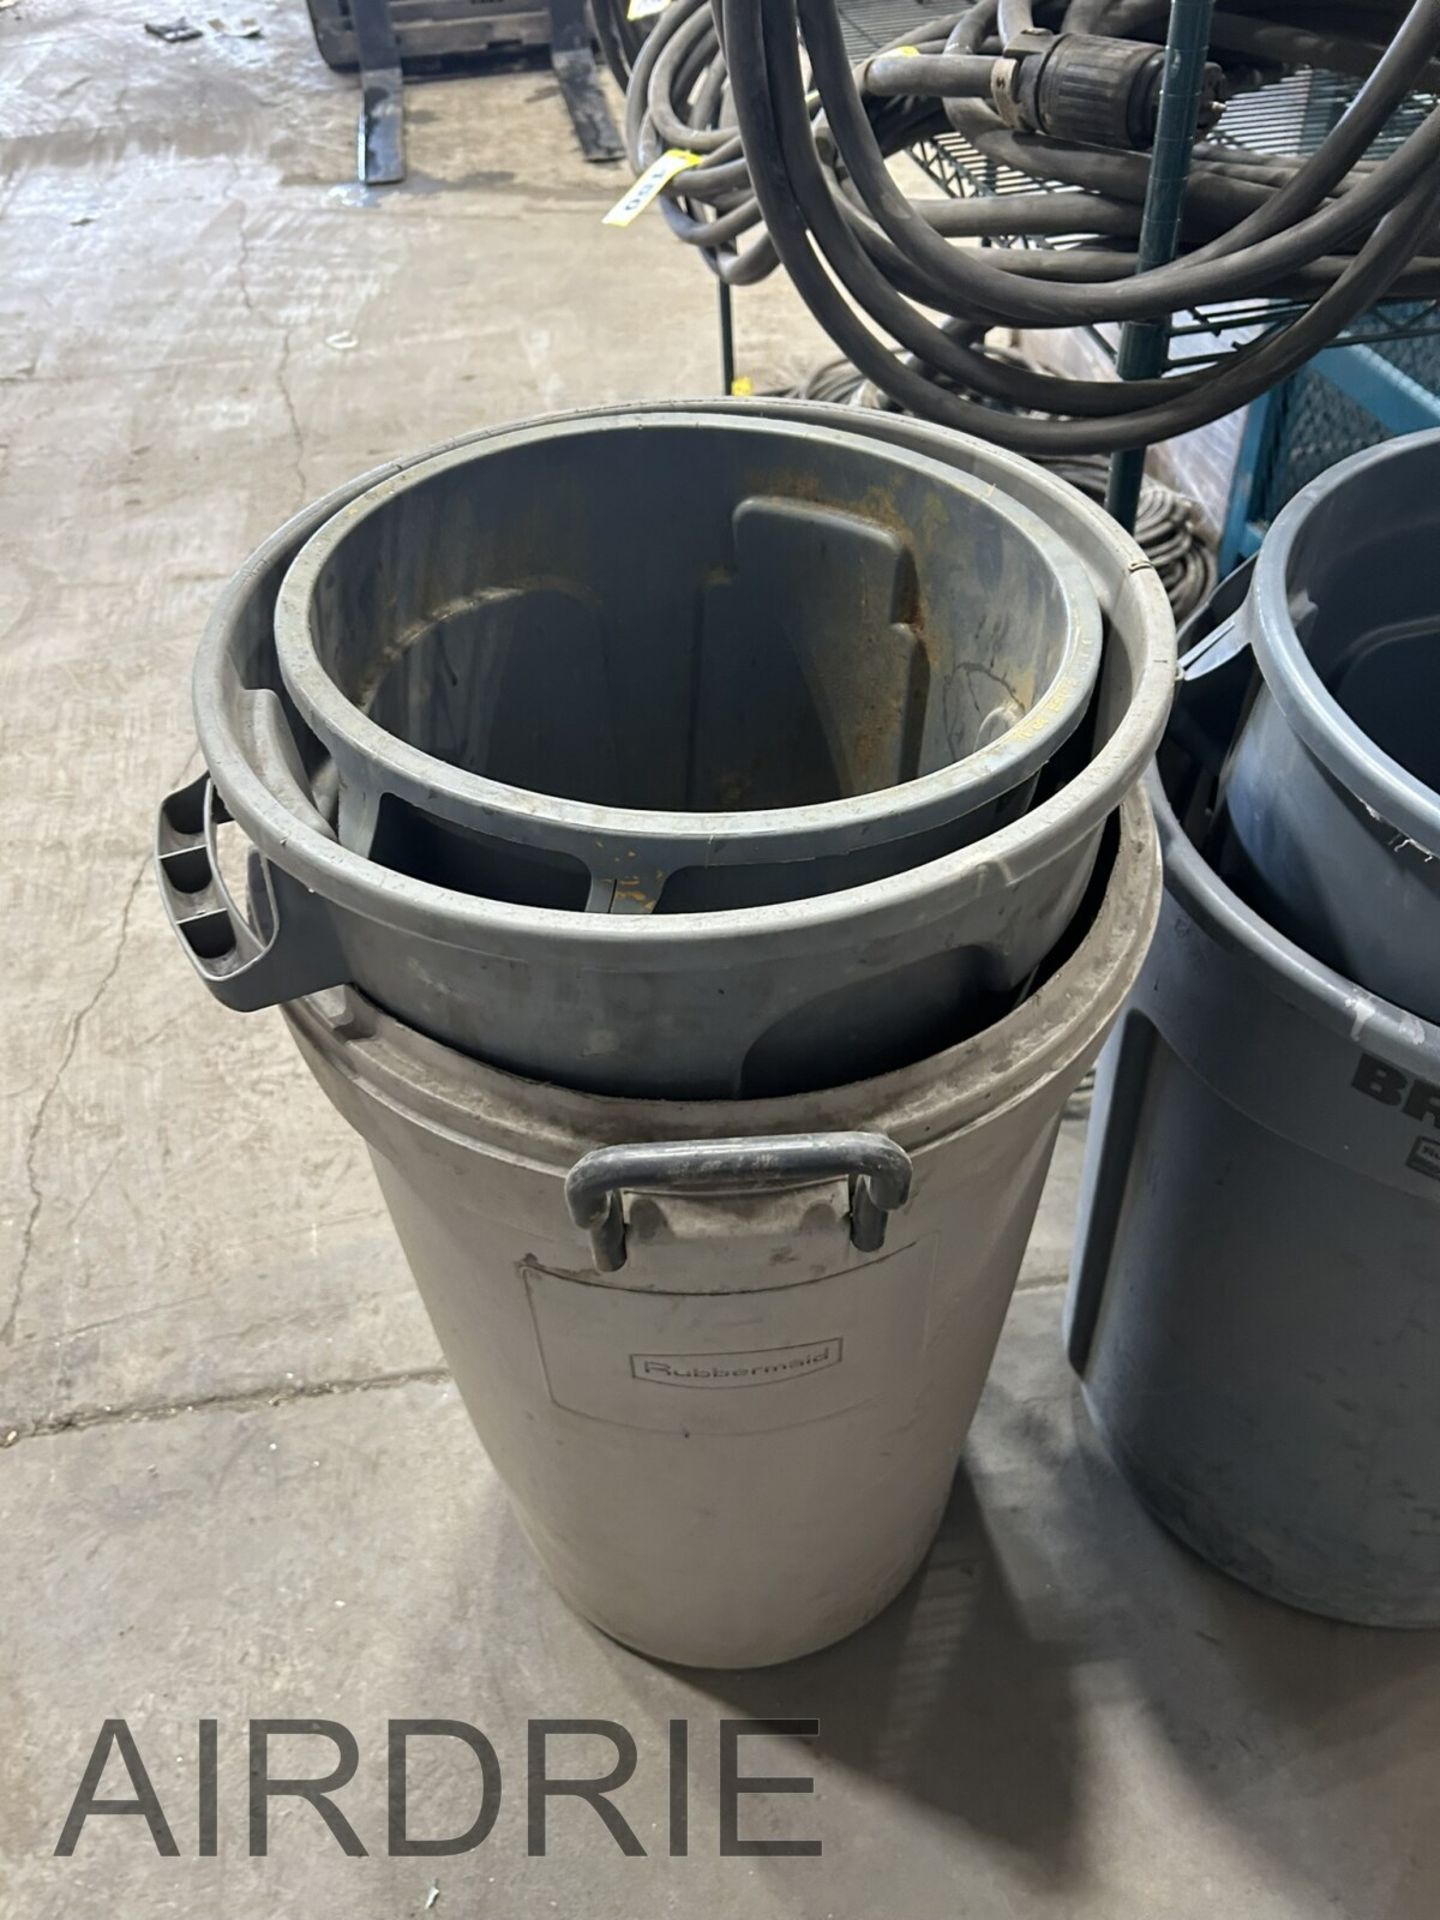 *OFFSITE* L/O RUBBERMAID GARBAGE BINS AND GALVANIZED WASTE BIN - Image 2 of 4